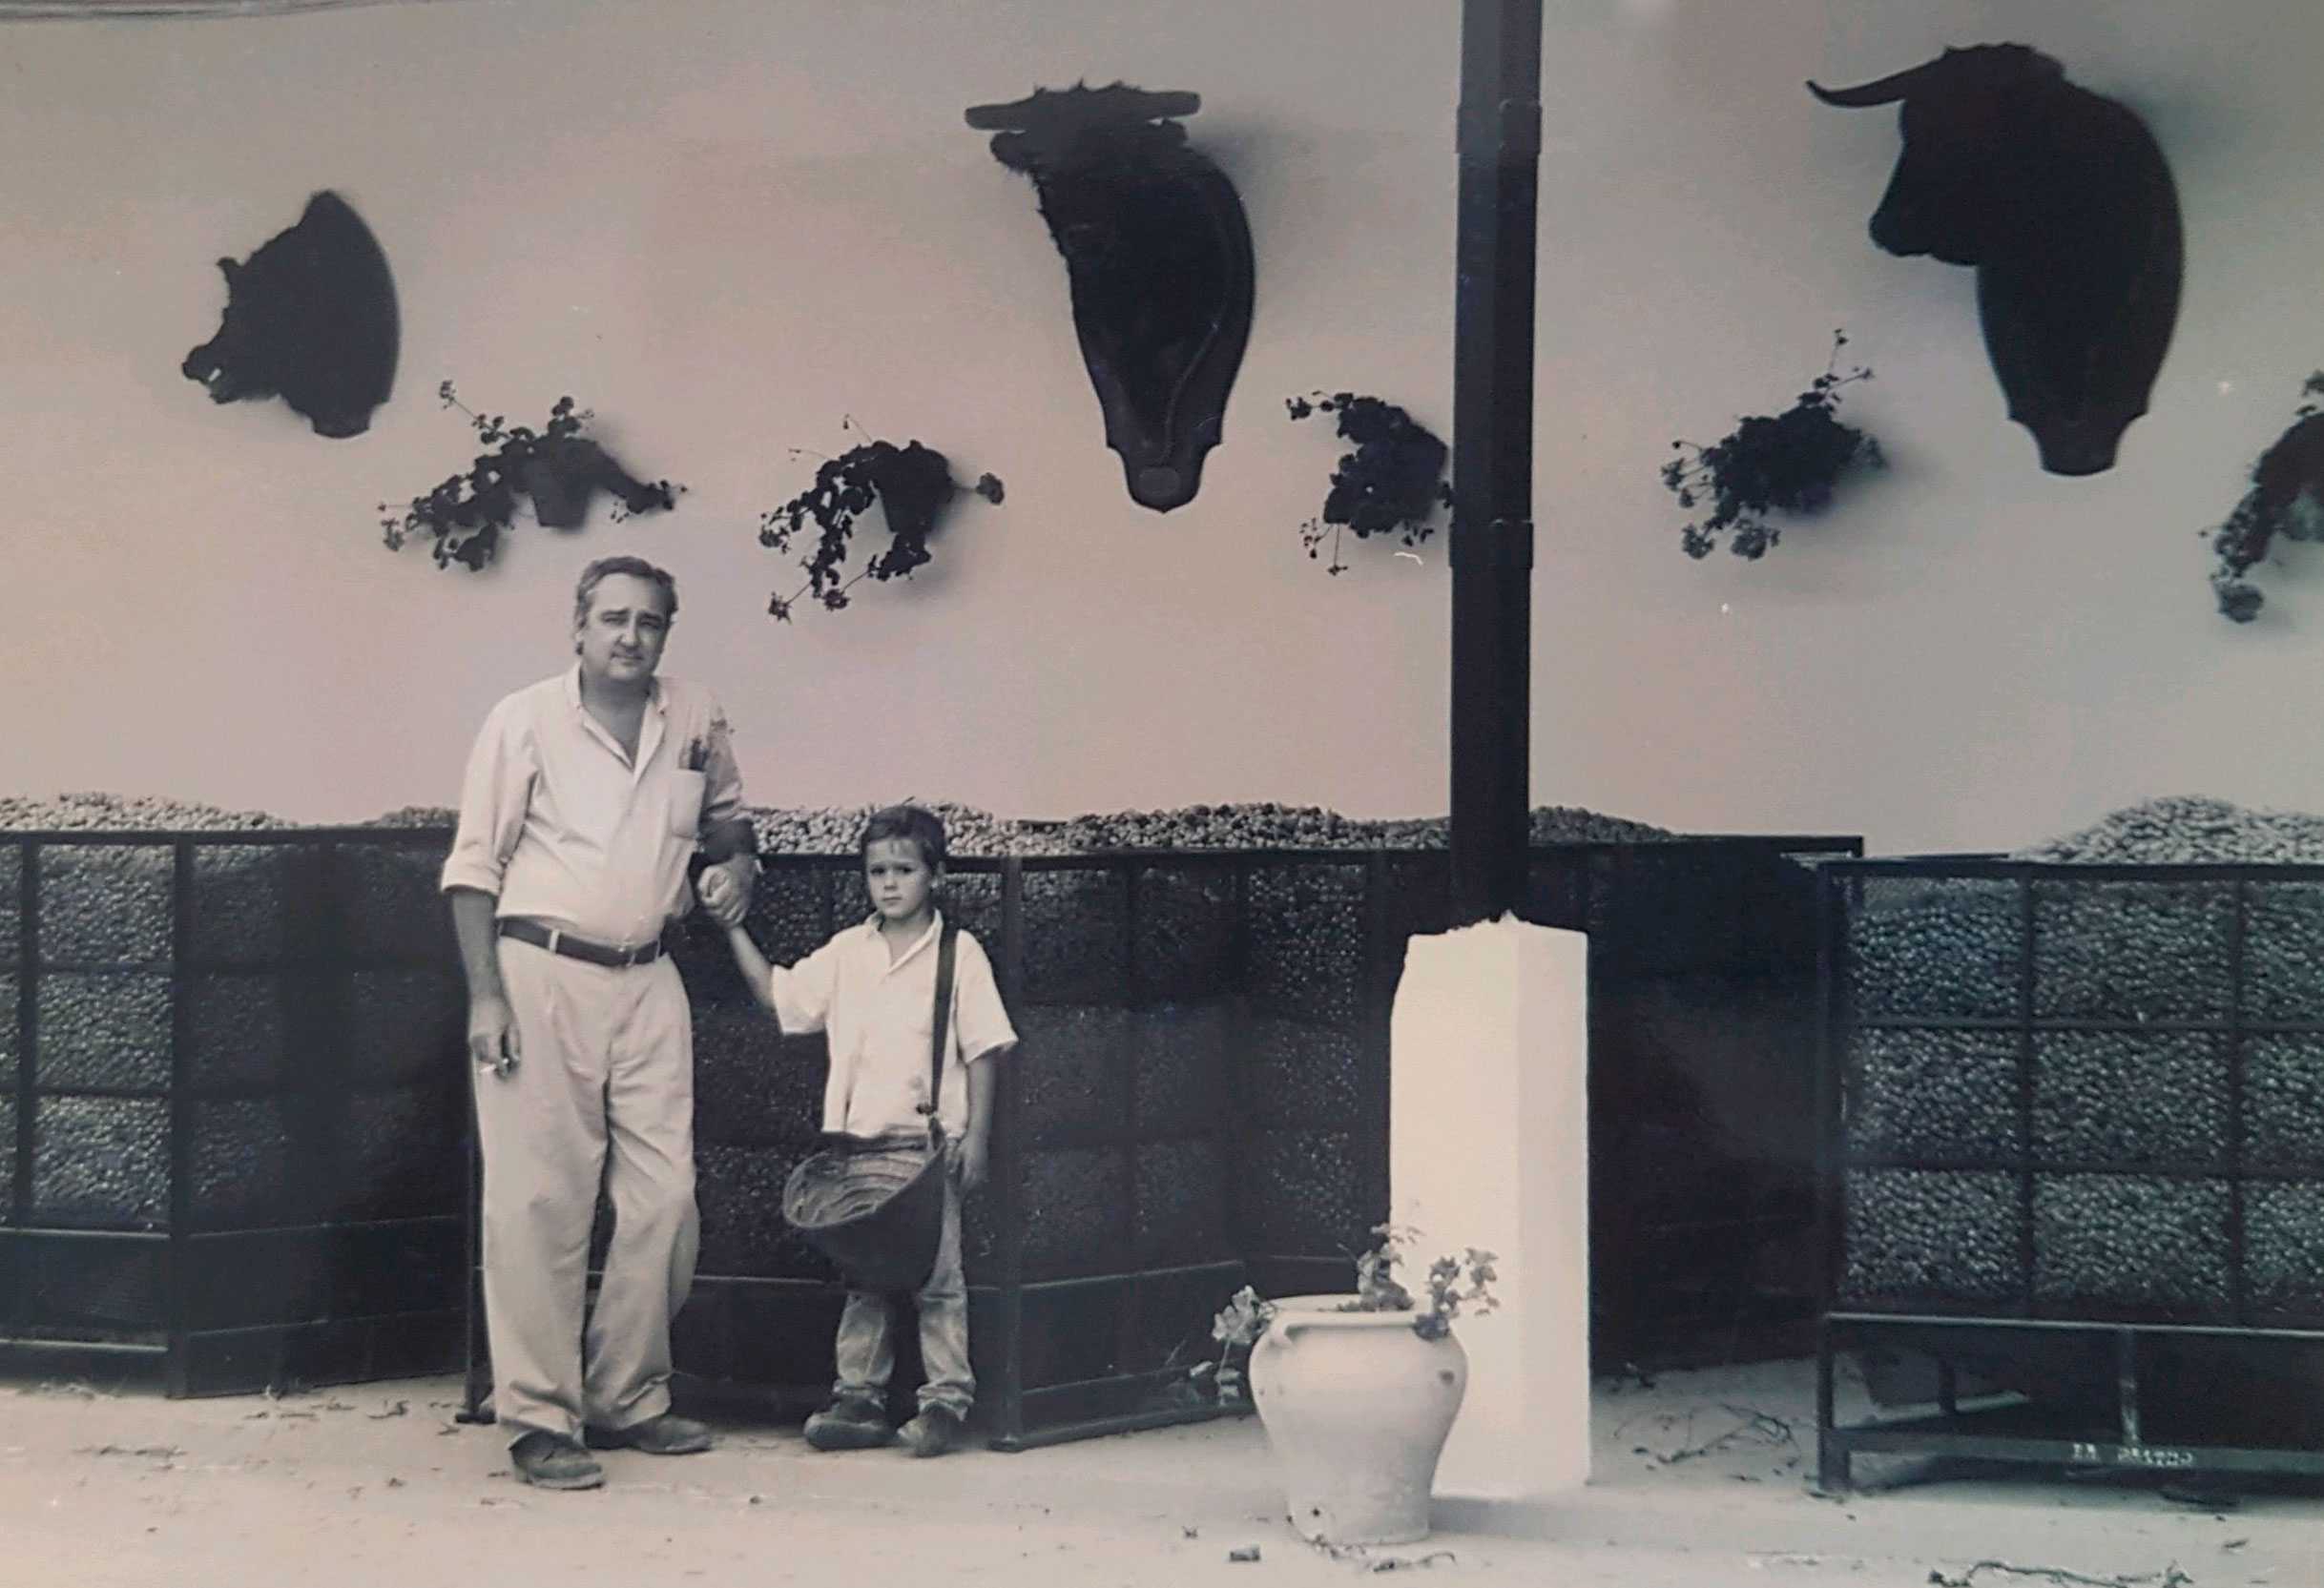 Carlos Núñez Pol with his son Carlos in 1999, in the agricultural exploitation.